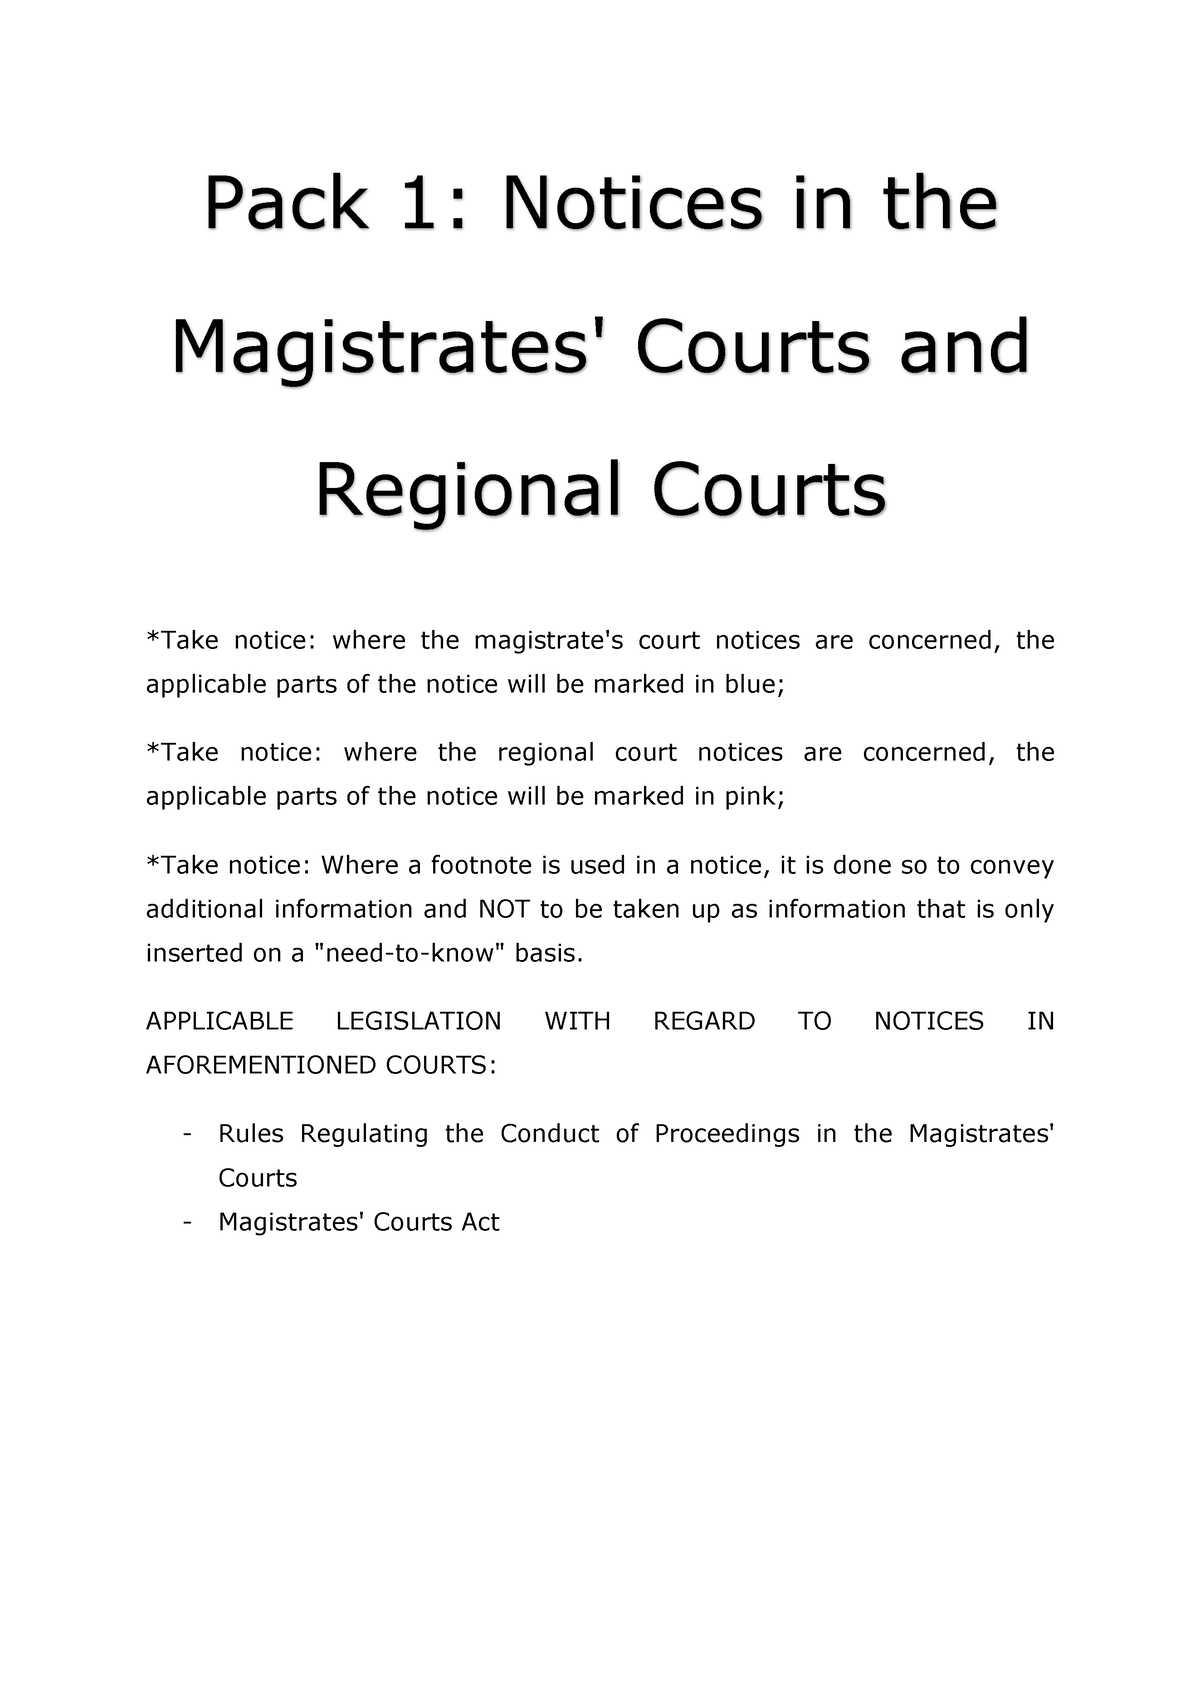 PACK 1 templates *Take notice: where the magistrate s court notices